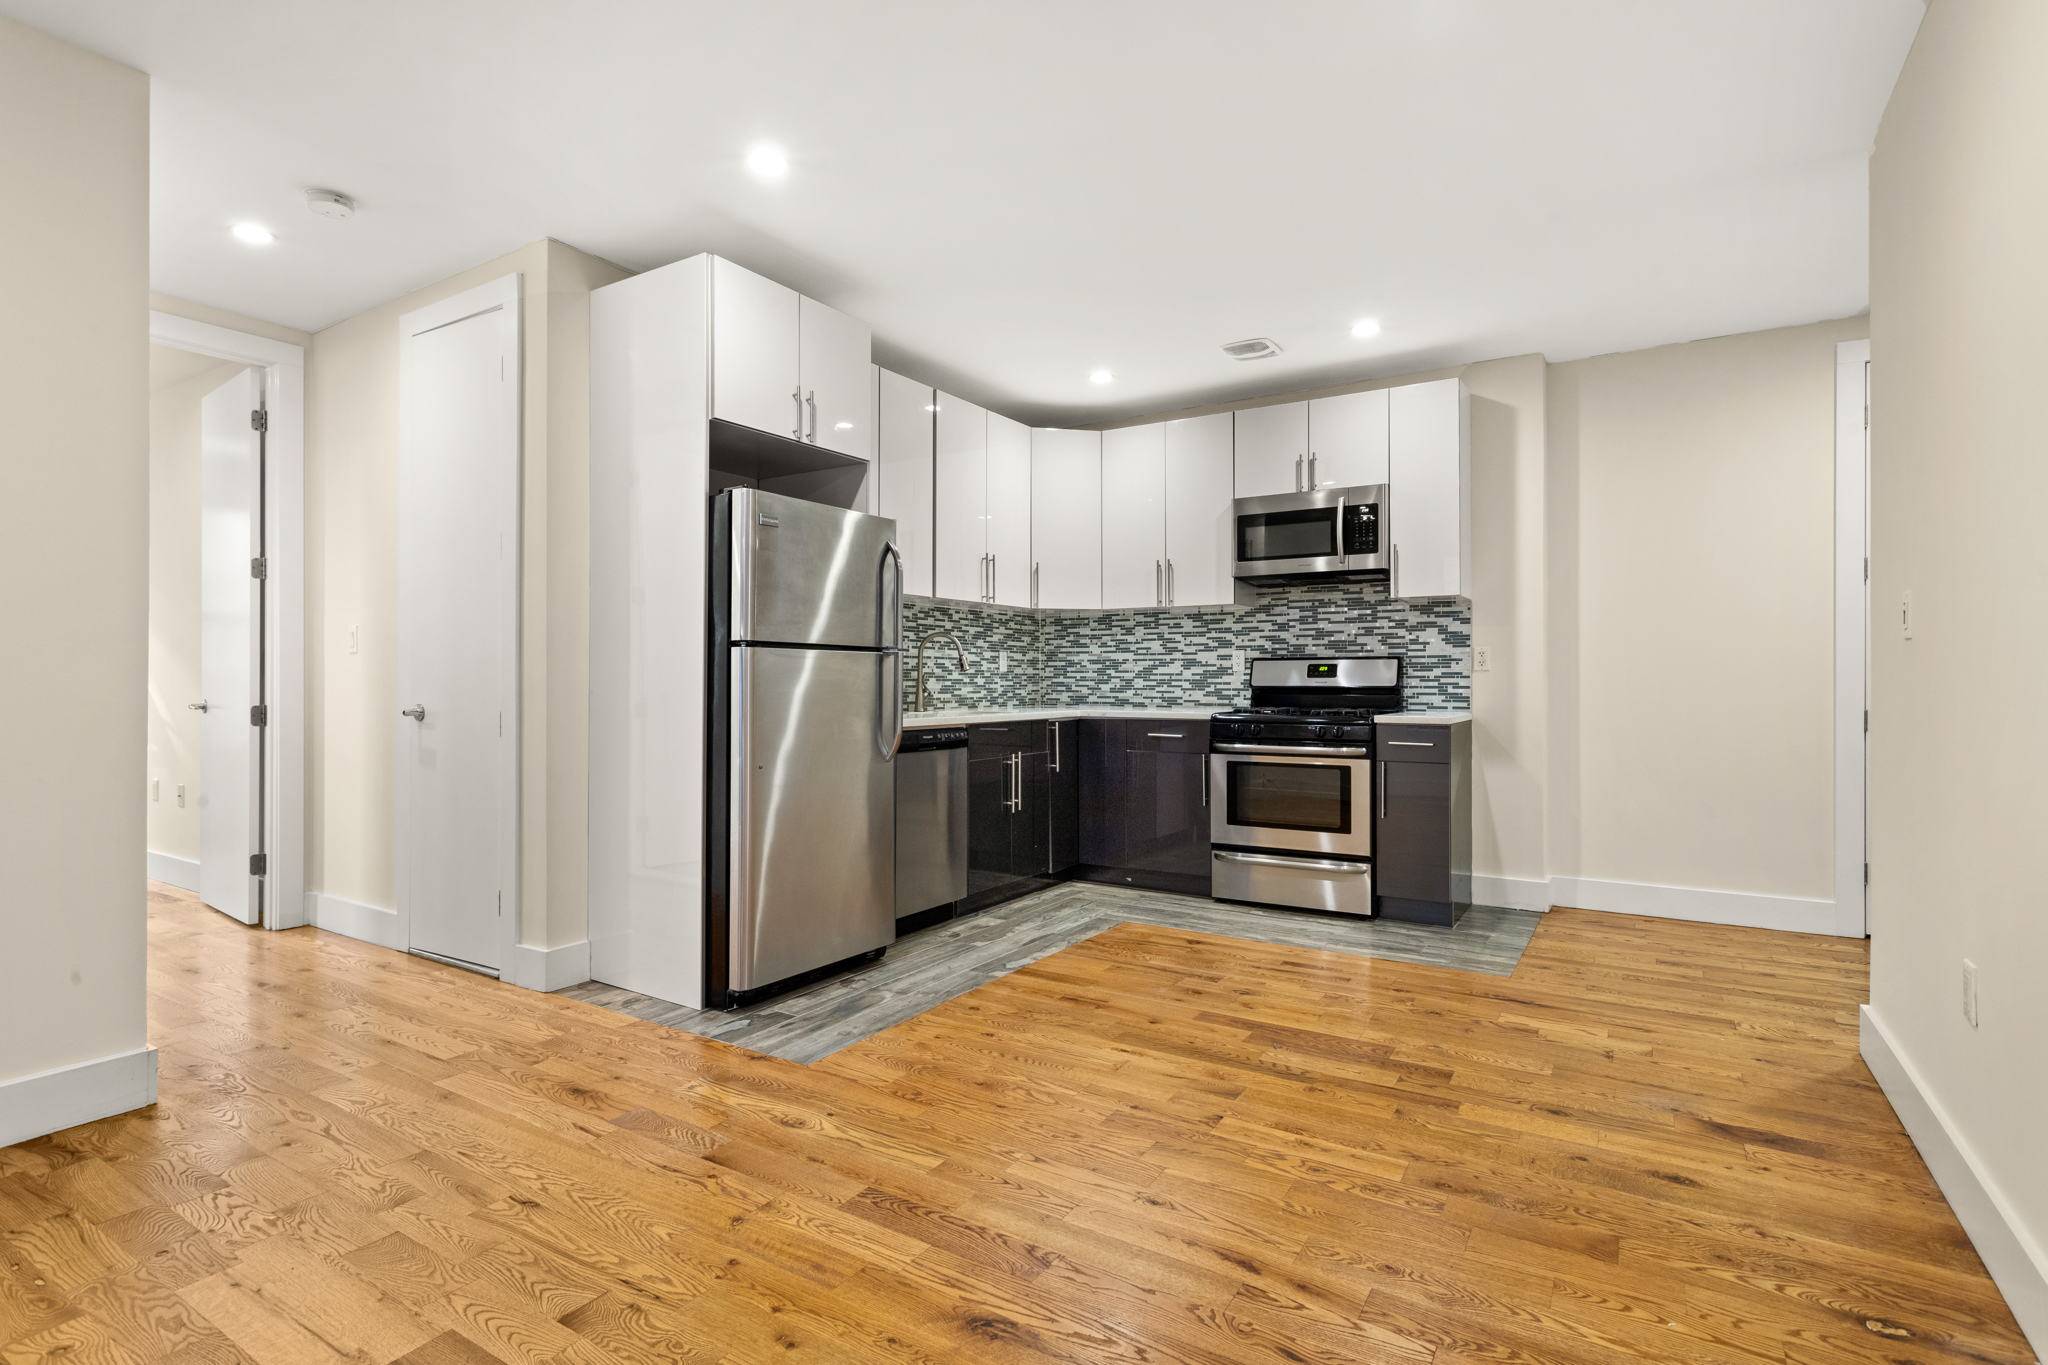 This gut renovated, 1000 square foot, 3 Bedroom 2 Full Bath apartment is nestled in a majestic prewar building on the corner of South Pinehurst Ave and West 177th.